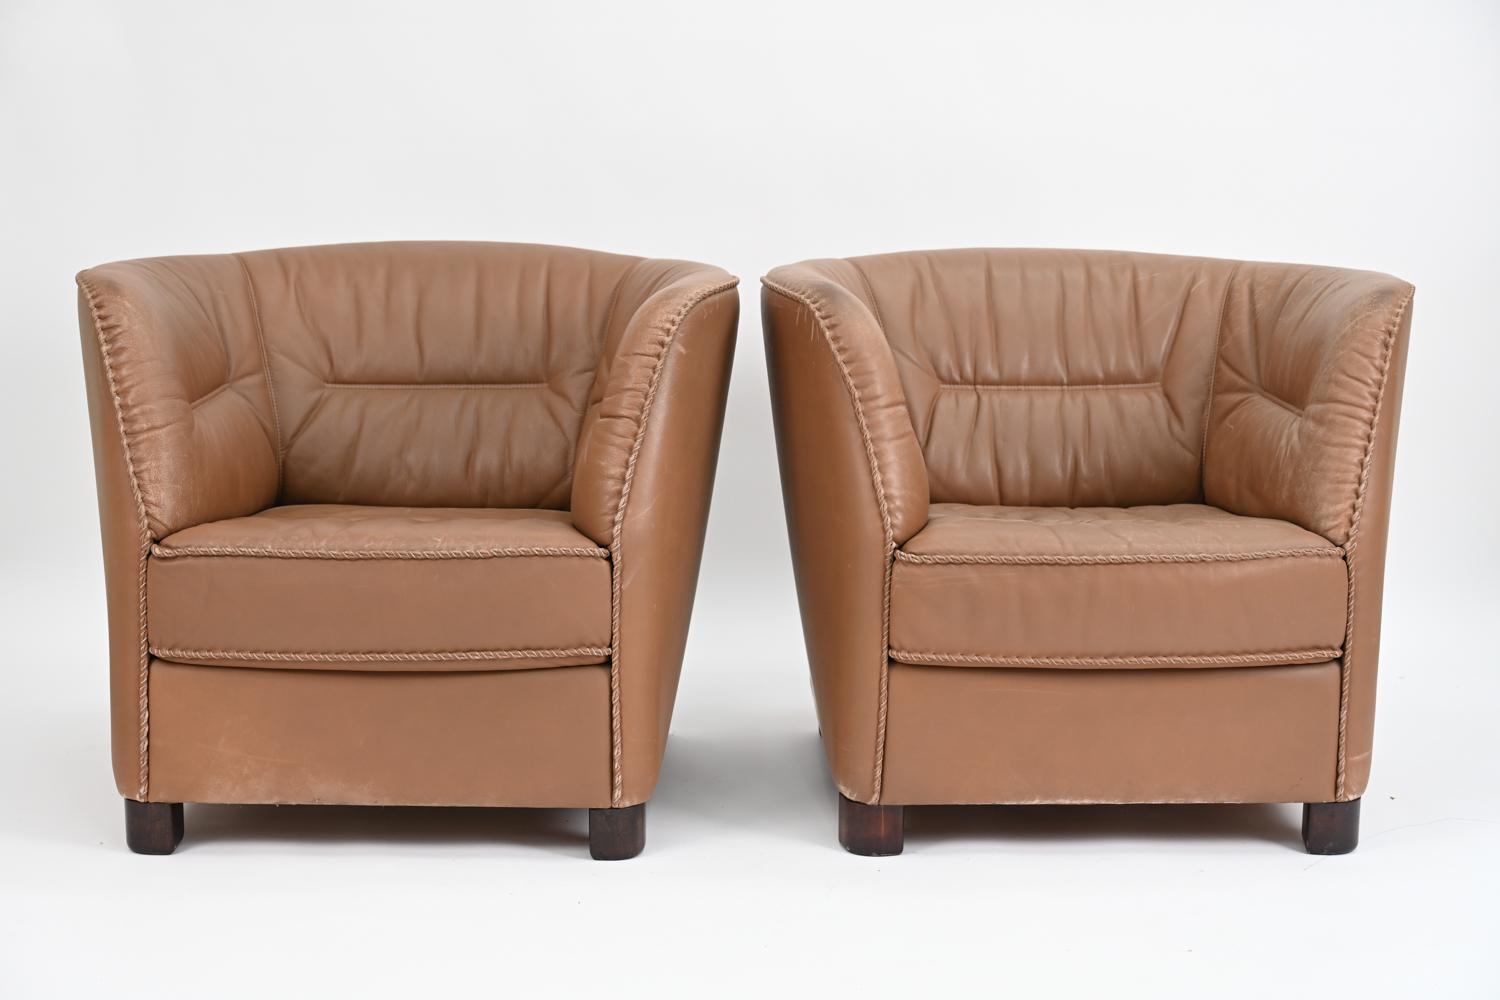 Mid-Century Modern Pair of Danish Modern Leather Whipstitched Lounge Chairs by Berg Furniture